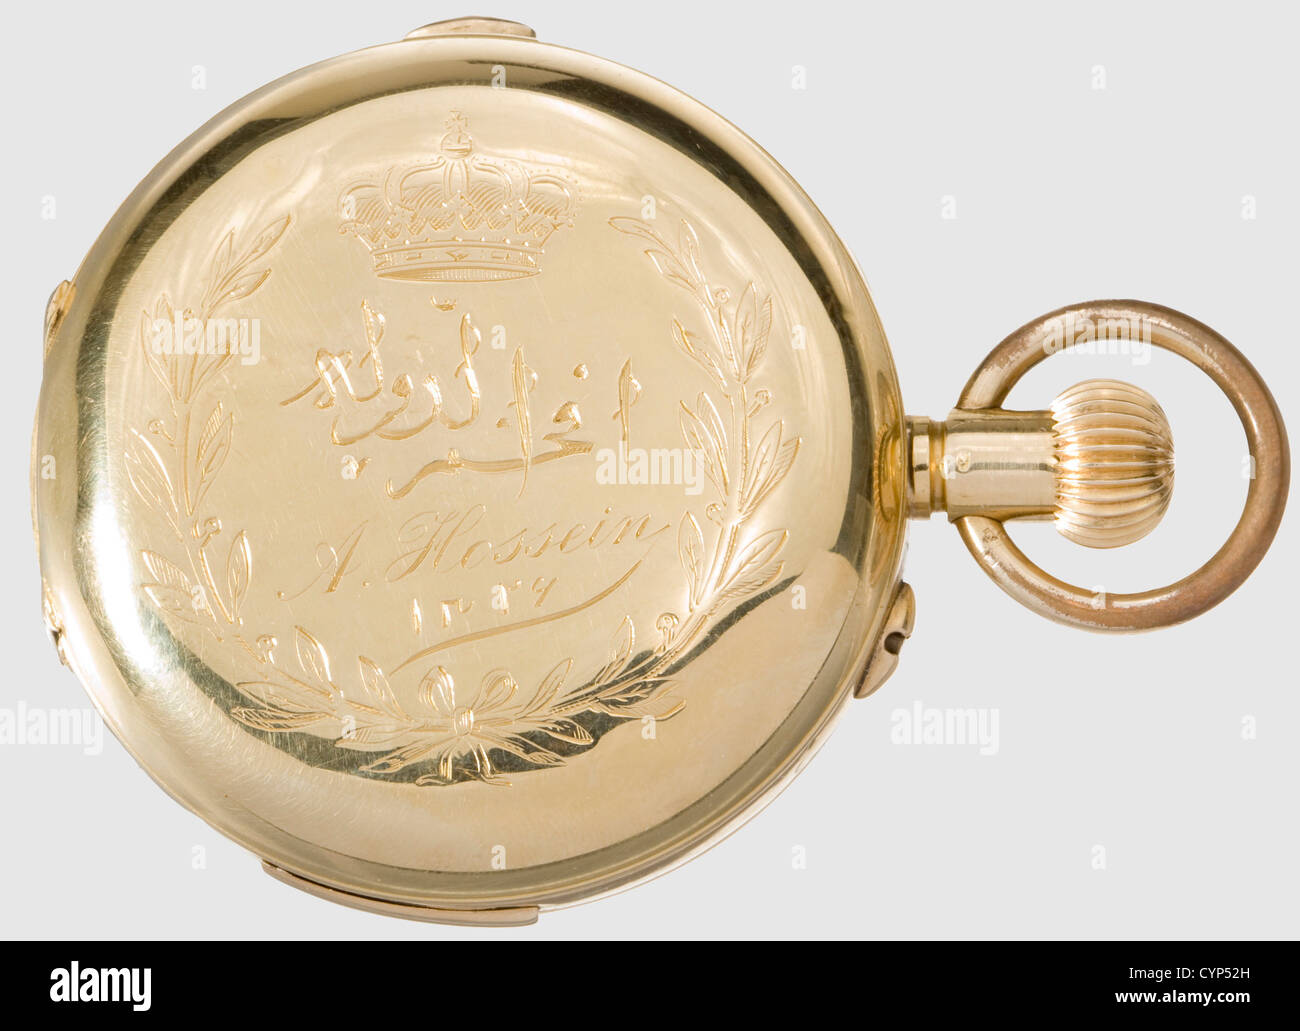 A pocket watch,presented to A. Hossein,Gold savonette with minute repetition and chronograph. The exterior of the hinged lid with the Arabic engraving 'His Excellency' and the name 'A. Hossein' in Latin letters under crown with the Arabic date '1326'(= 1908). White enamel dial(hairline cracks)with Roman numerals,blued hands,and a large,gold coloured chronograph hand. Unnumbered gilt escapement with goose-neck fine adjustment,blued Breguet spiral with screw balance,and a two bell chime released by a side lever between the numerals VI and VII. The chron,Additional-Rights-Clearences-Not Available Stock Photo